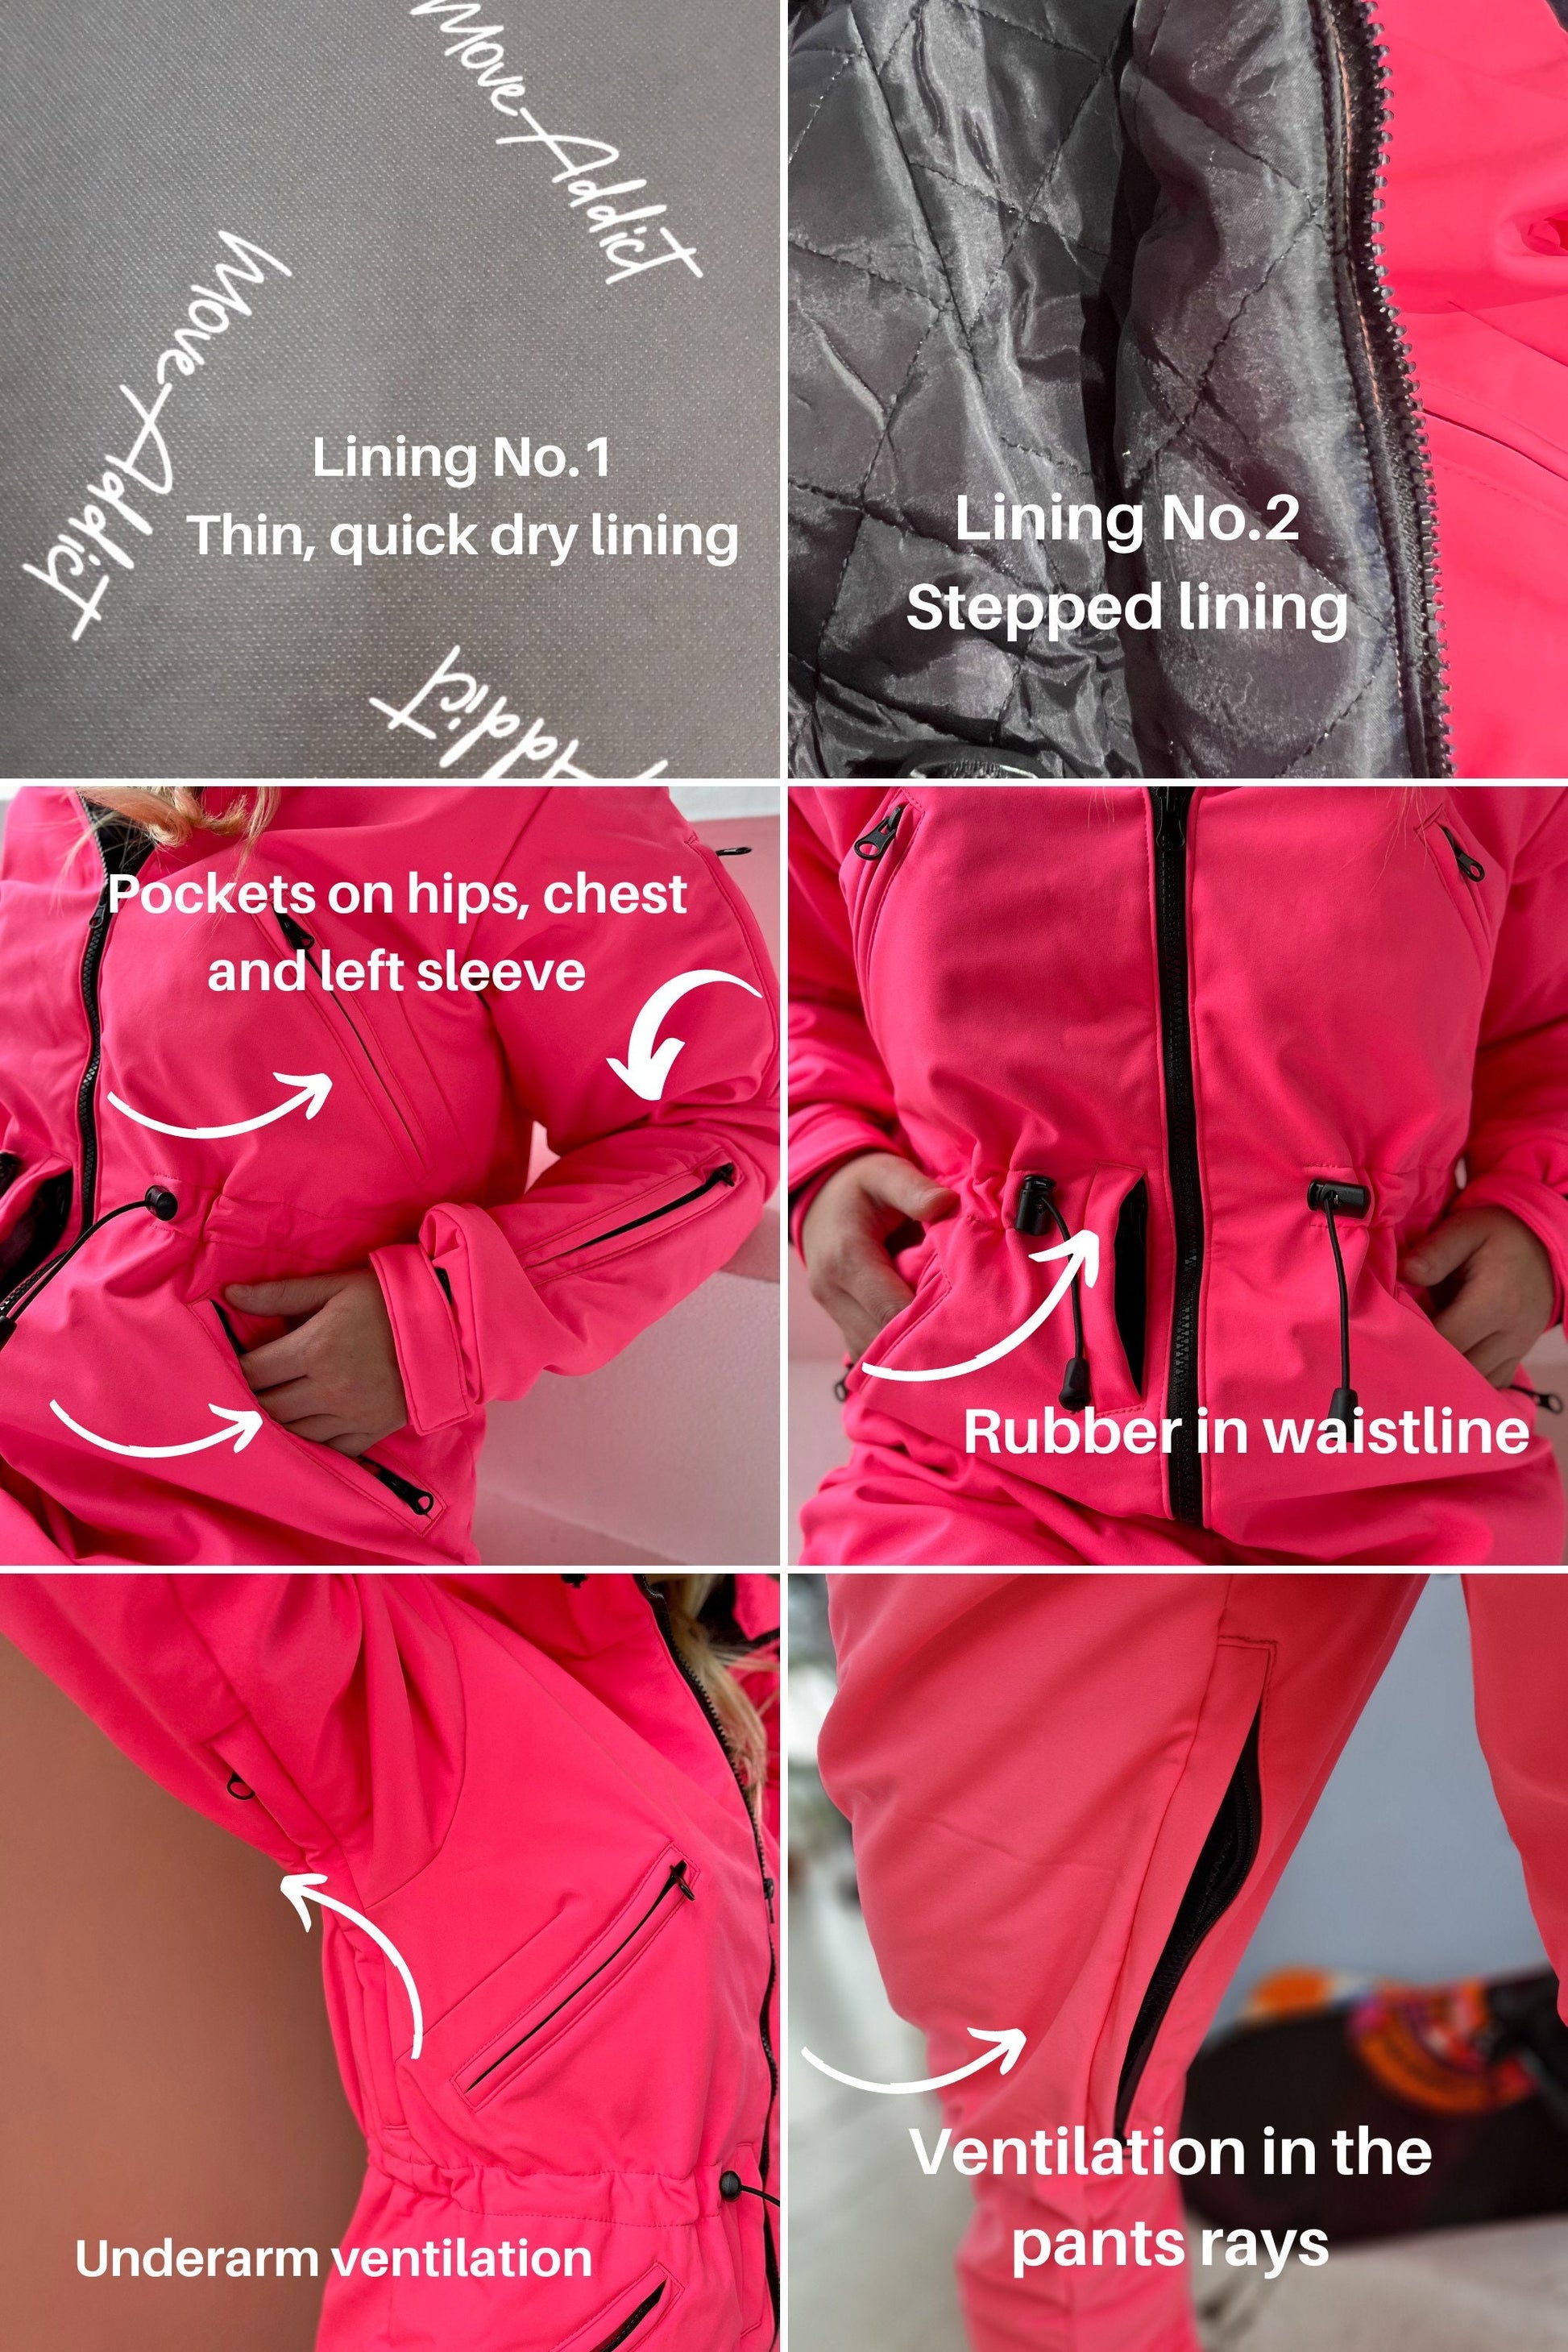 Neon Pink Winter Ski Jumpsuit, Snowboard Clothes, Snowboard suit, Skiing Overall, Ski Suit Women, Jumpsuit winter, Colorful Onesie